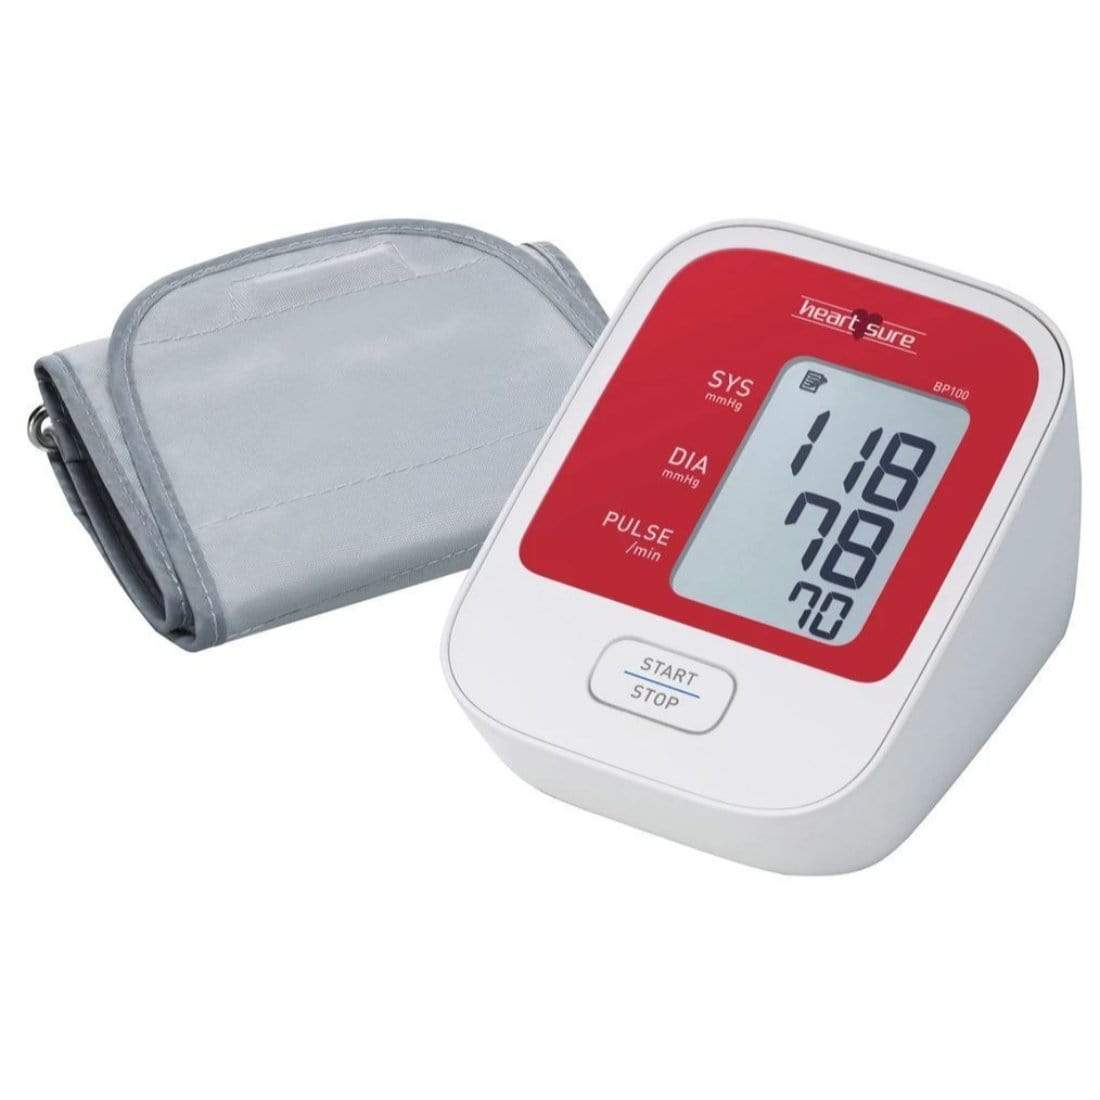 https://cdn.shopify.com/s/files/1/0012/8440/7394/products/omron-blood-pressure-monitor-heart-sure-bp100-omron-14463218745442.jpg?v=1628466027